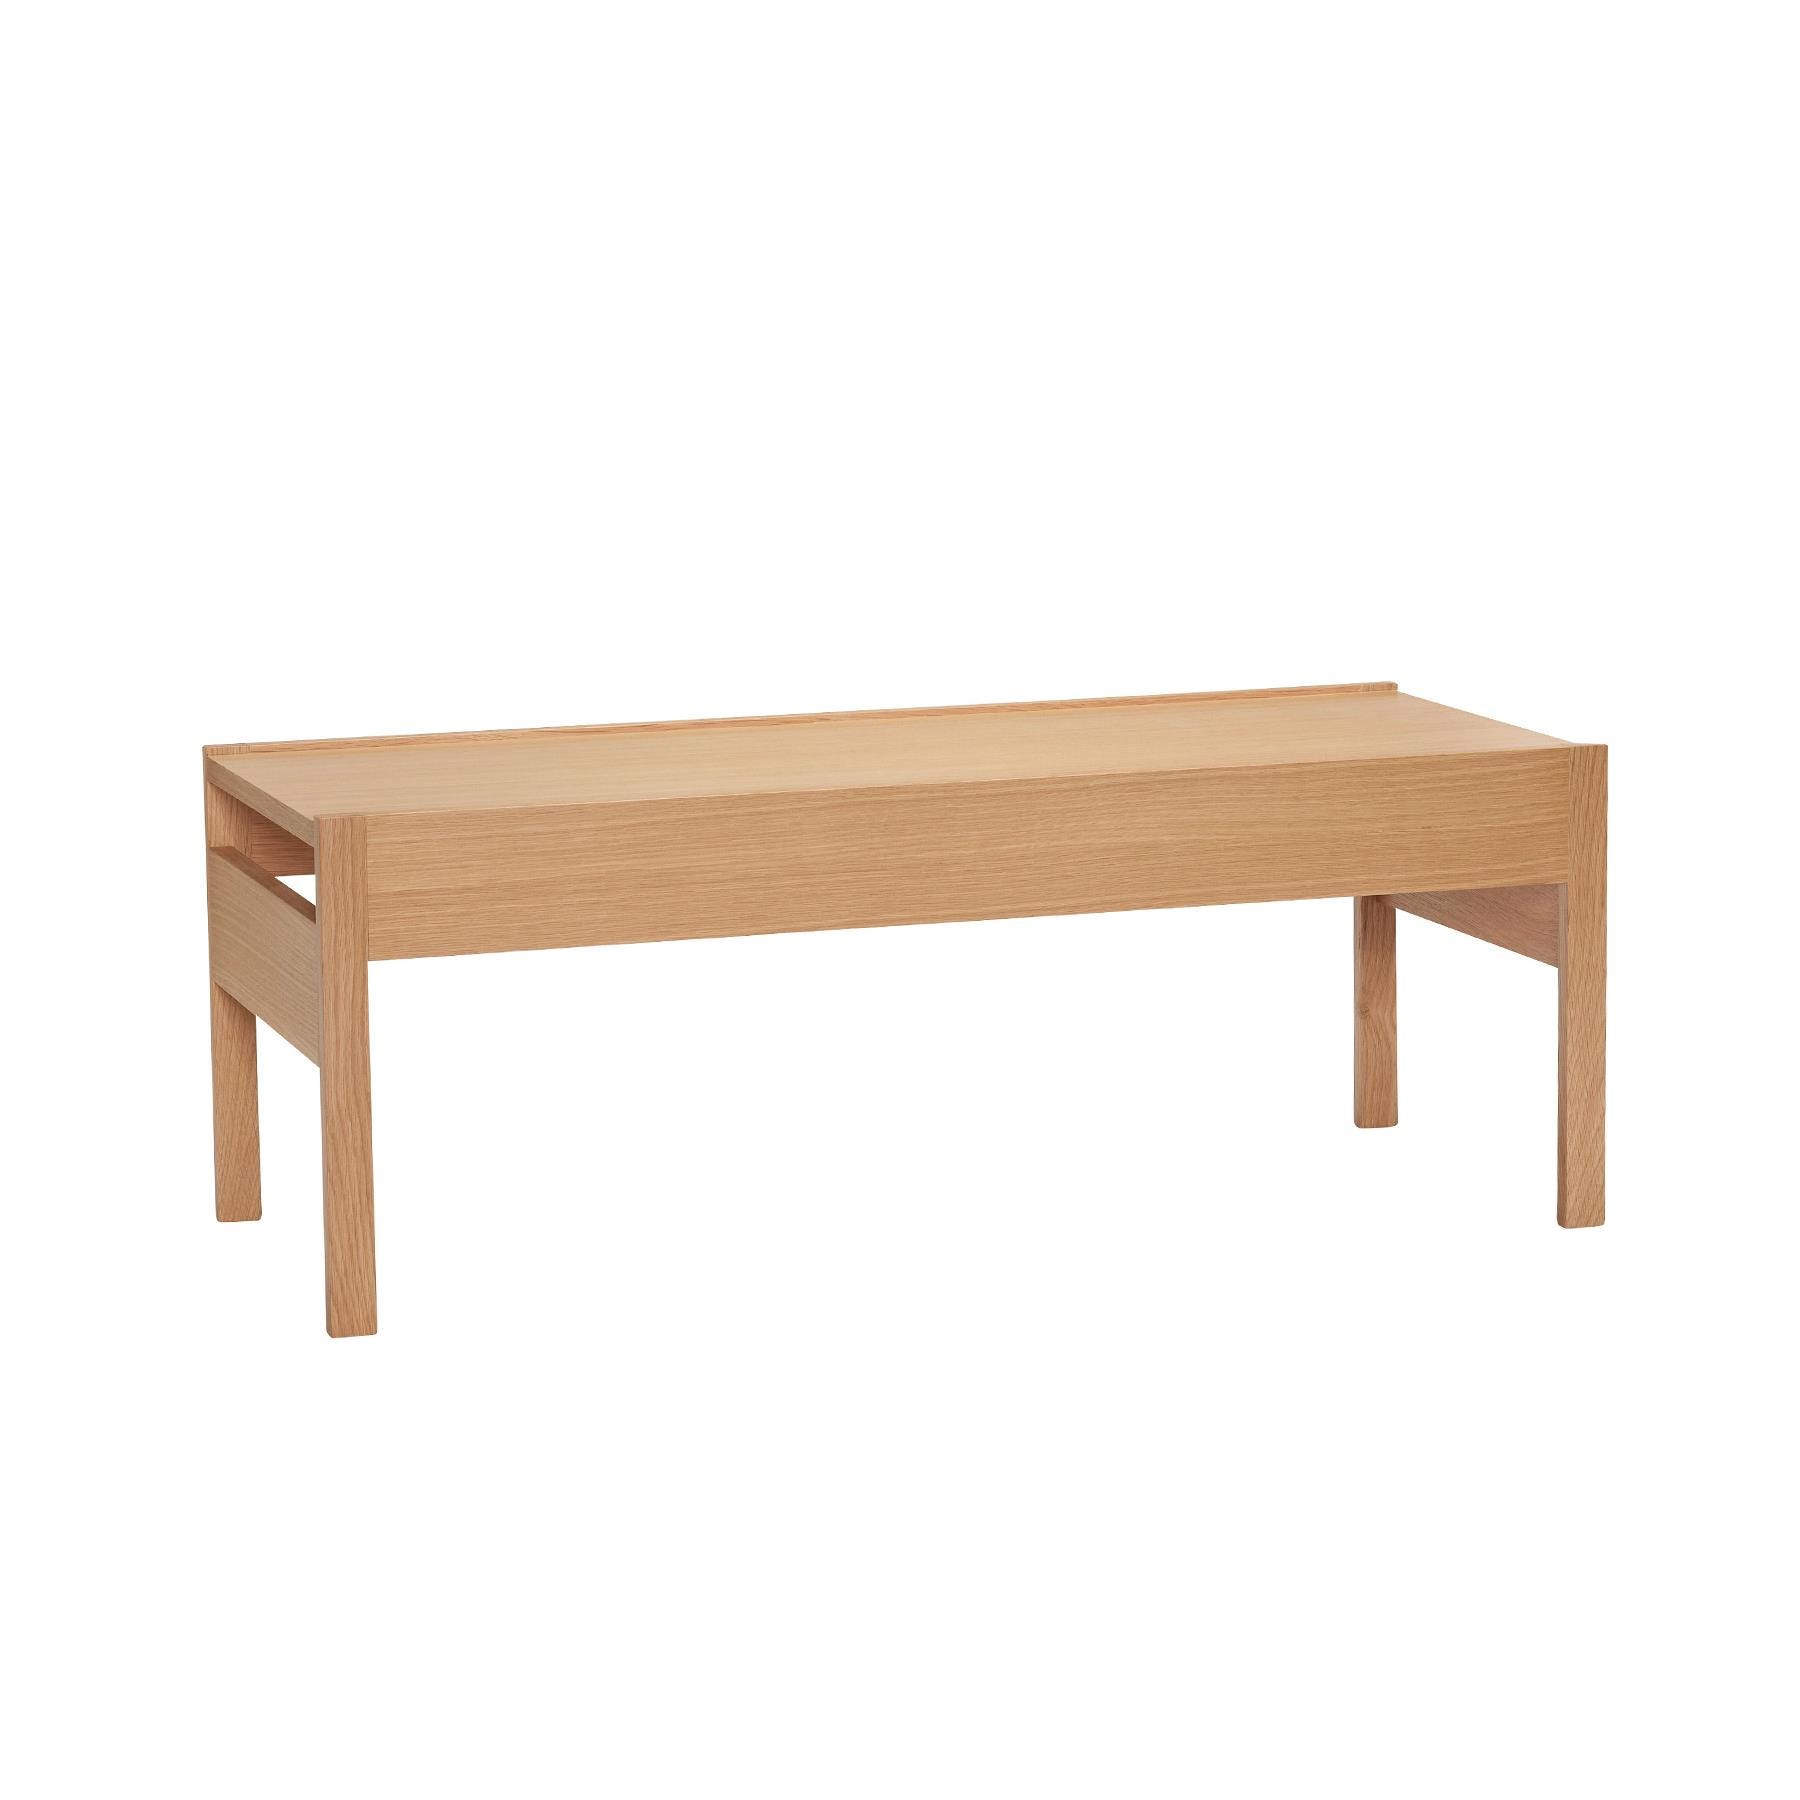 Forma Coffee Table Light Wood Designer Furniture From Holloways Of Ludlow